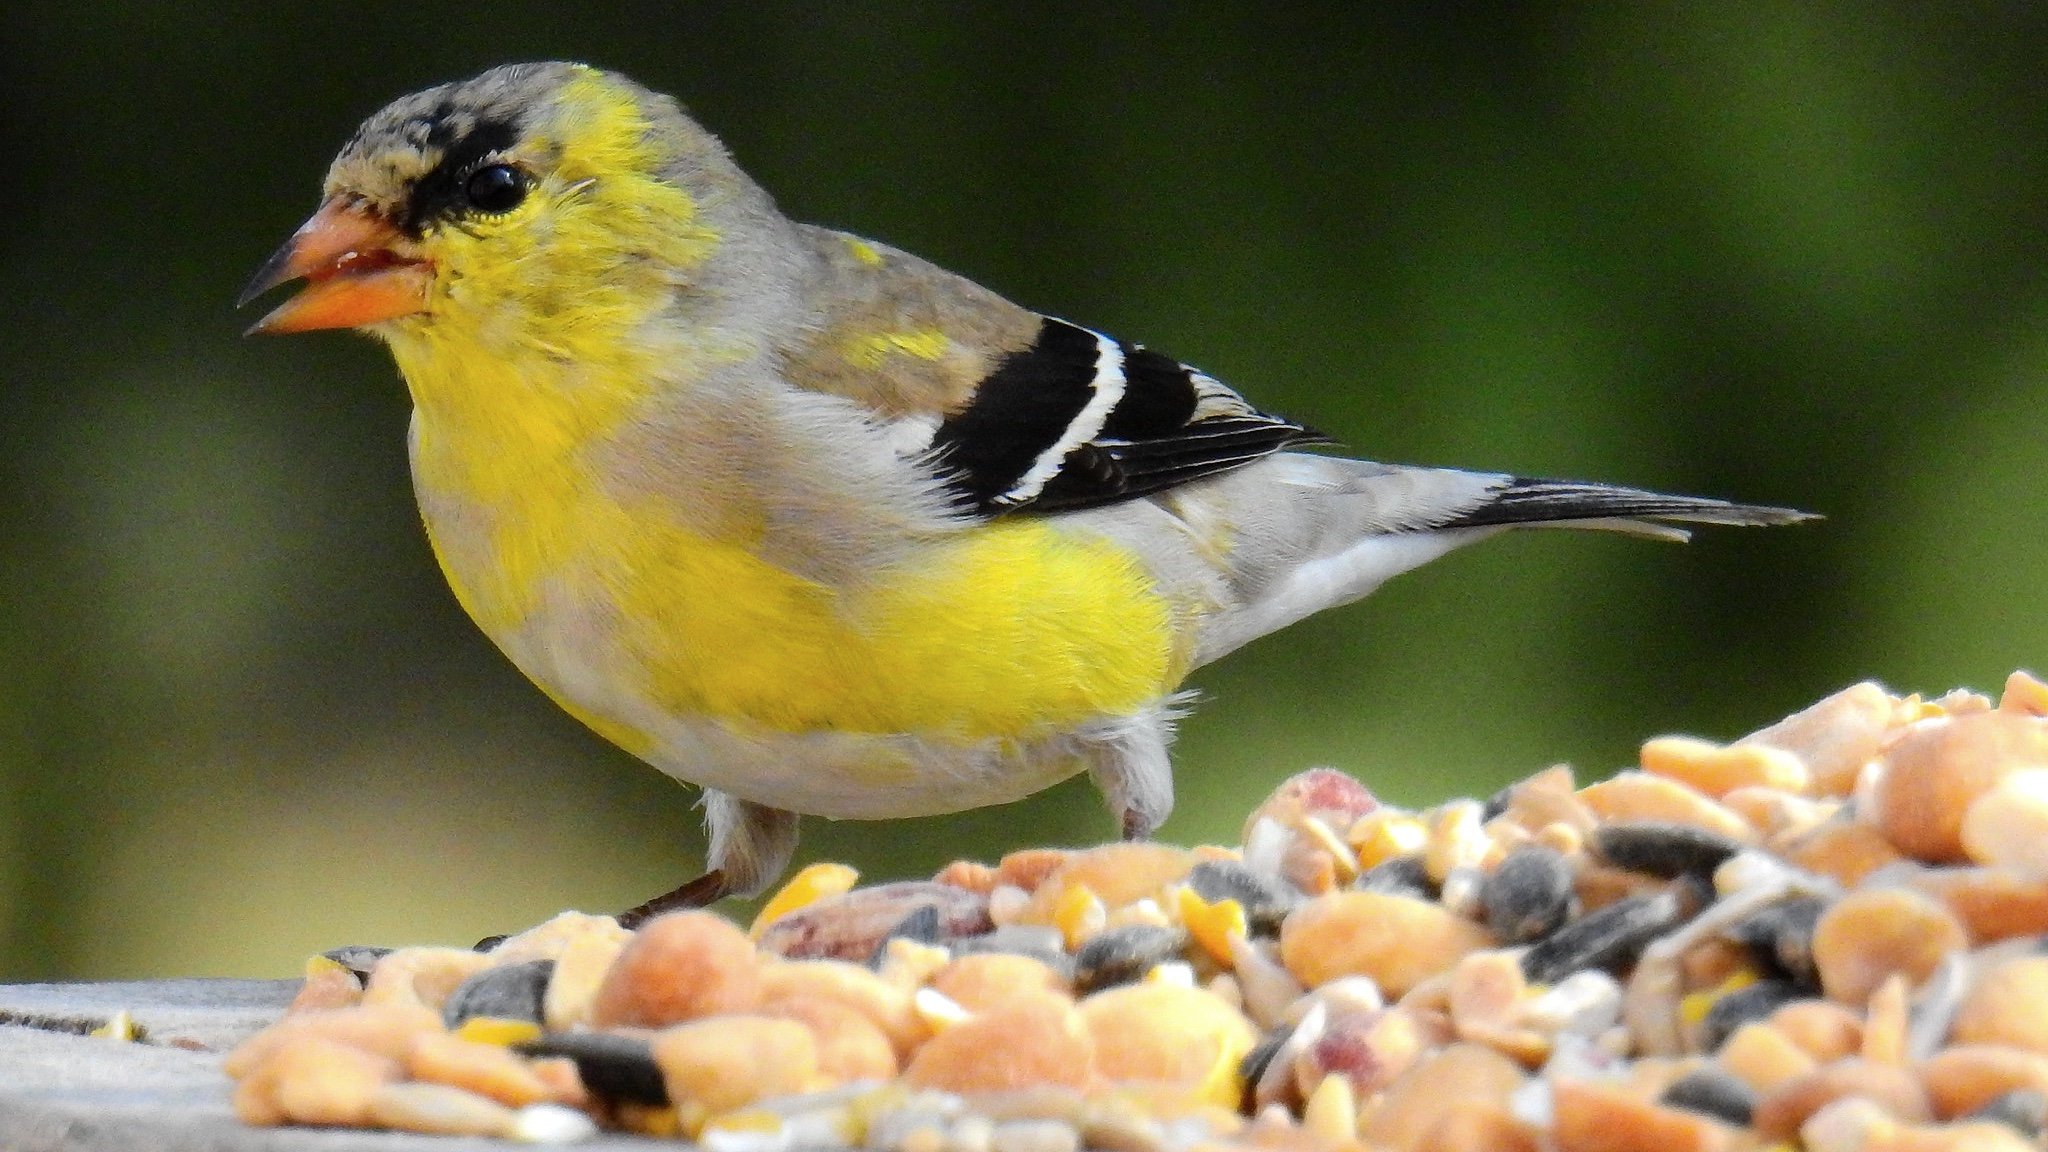 Look for an American goldfinch during Saturday's Big Day birding event. (Ken Gibson / Flickr)